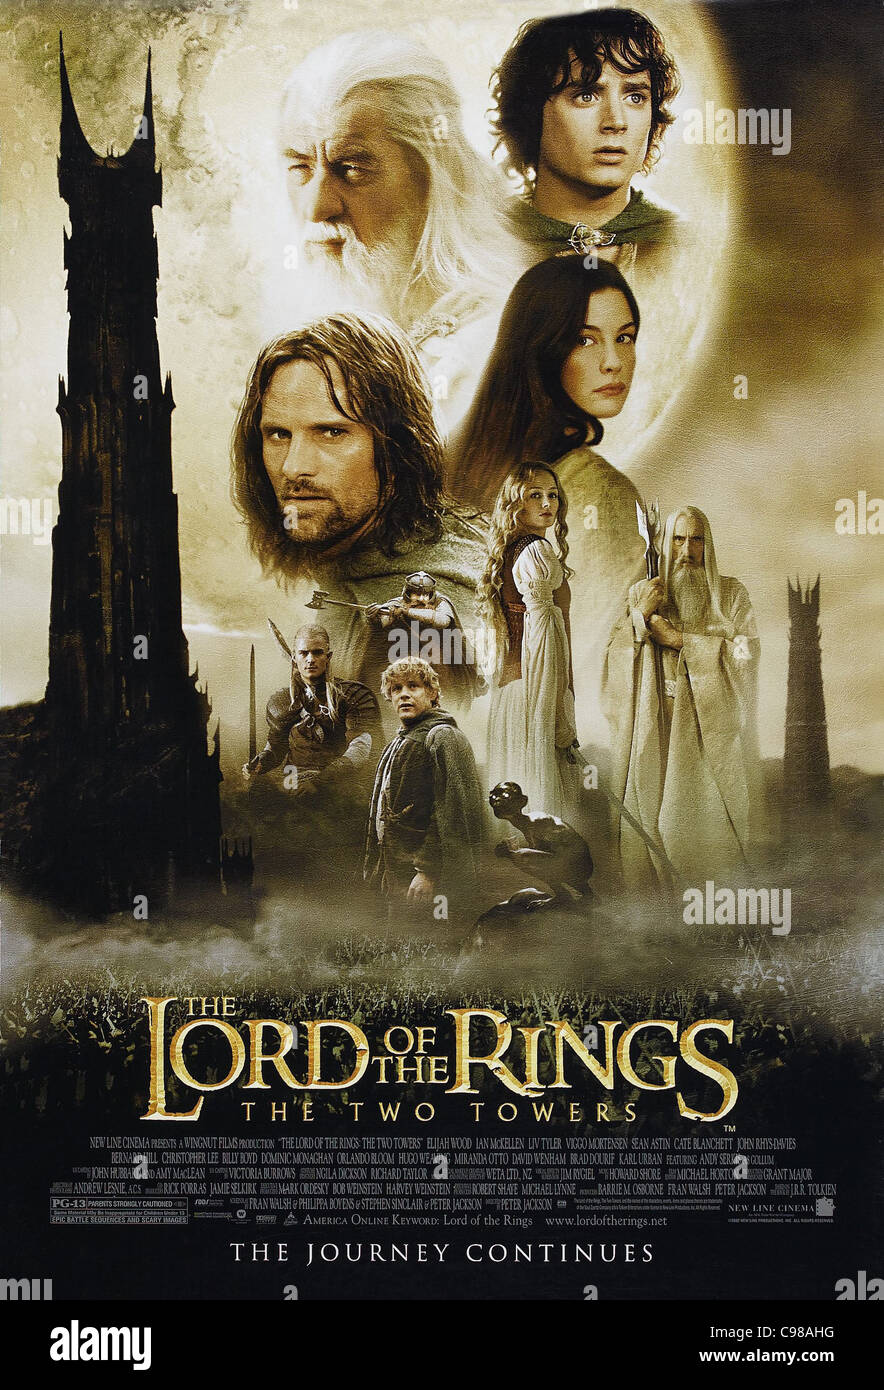 lord of the rings dvd | The Lord Of The Rings Trilogy [DVD]